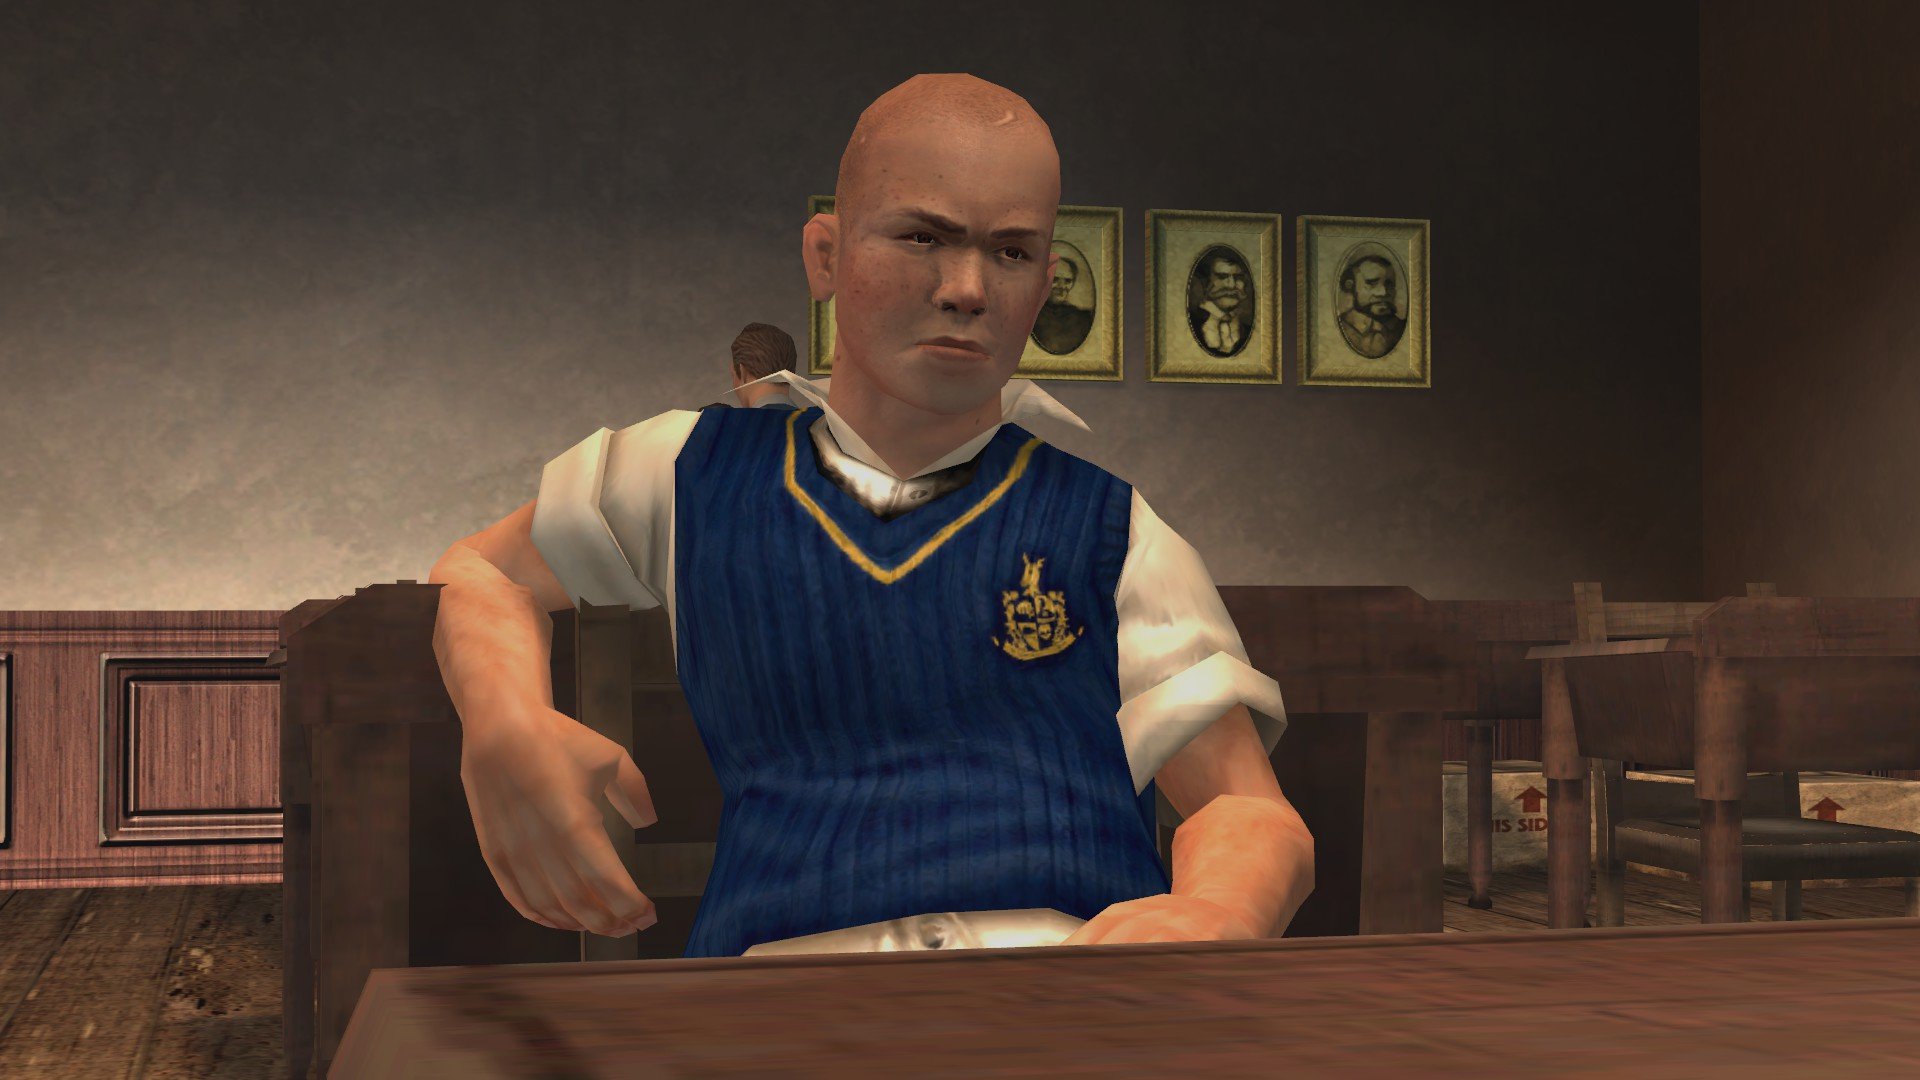 Bully: Anniversary Edition review - The best days of Rockstar's